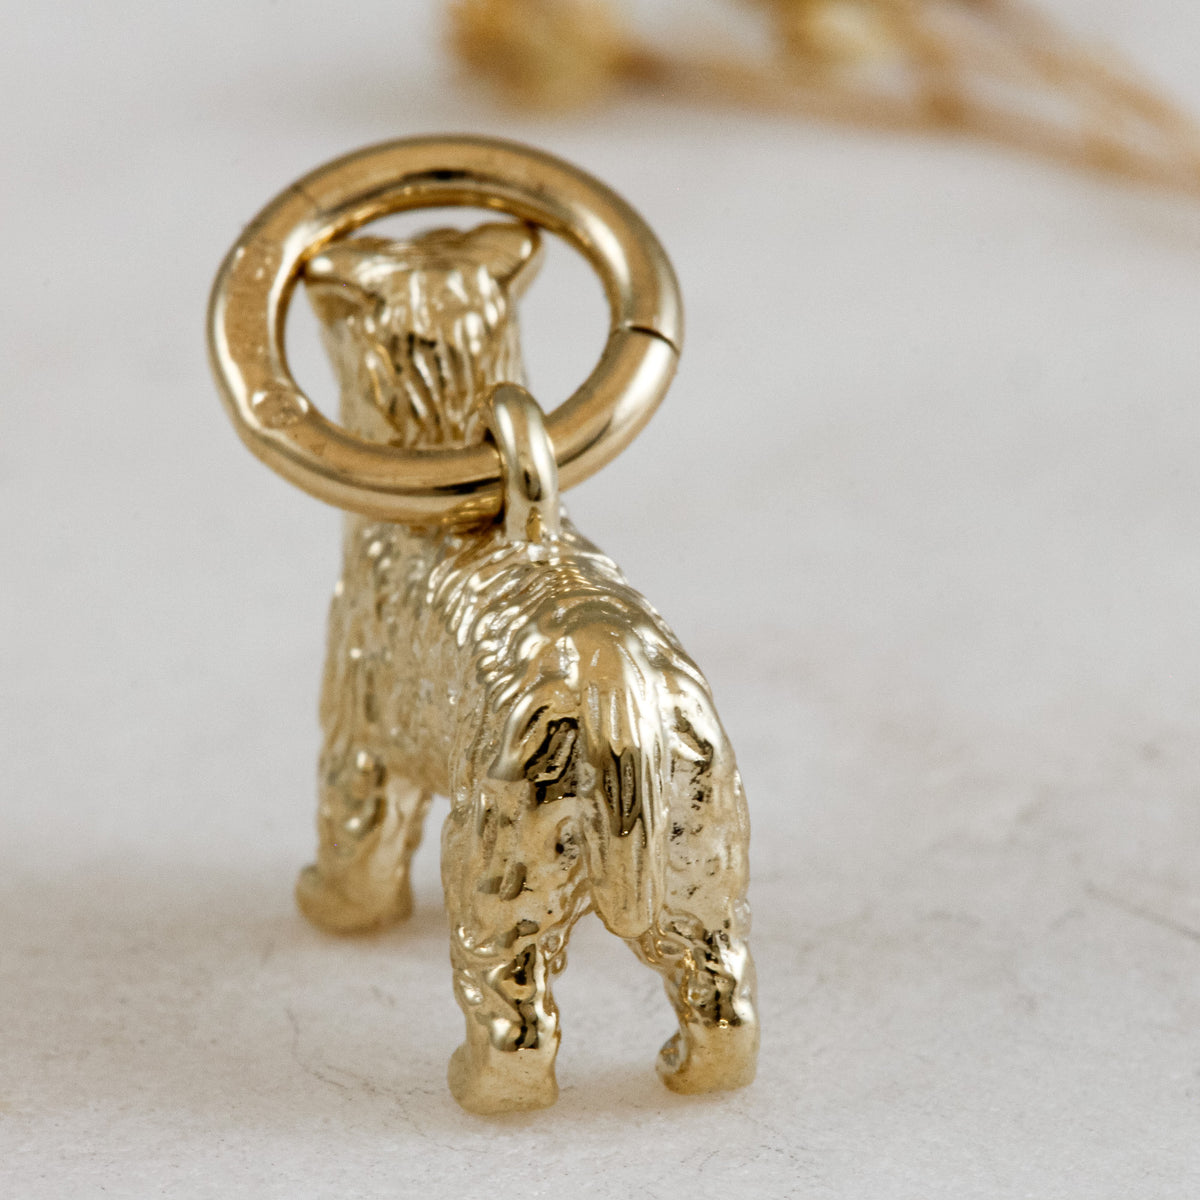 miniature schnauzer solid gold dog charm for a necklace or bracelet